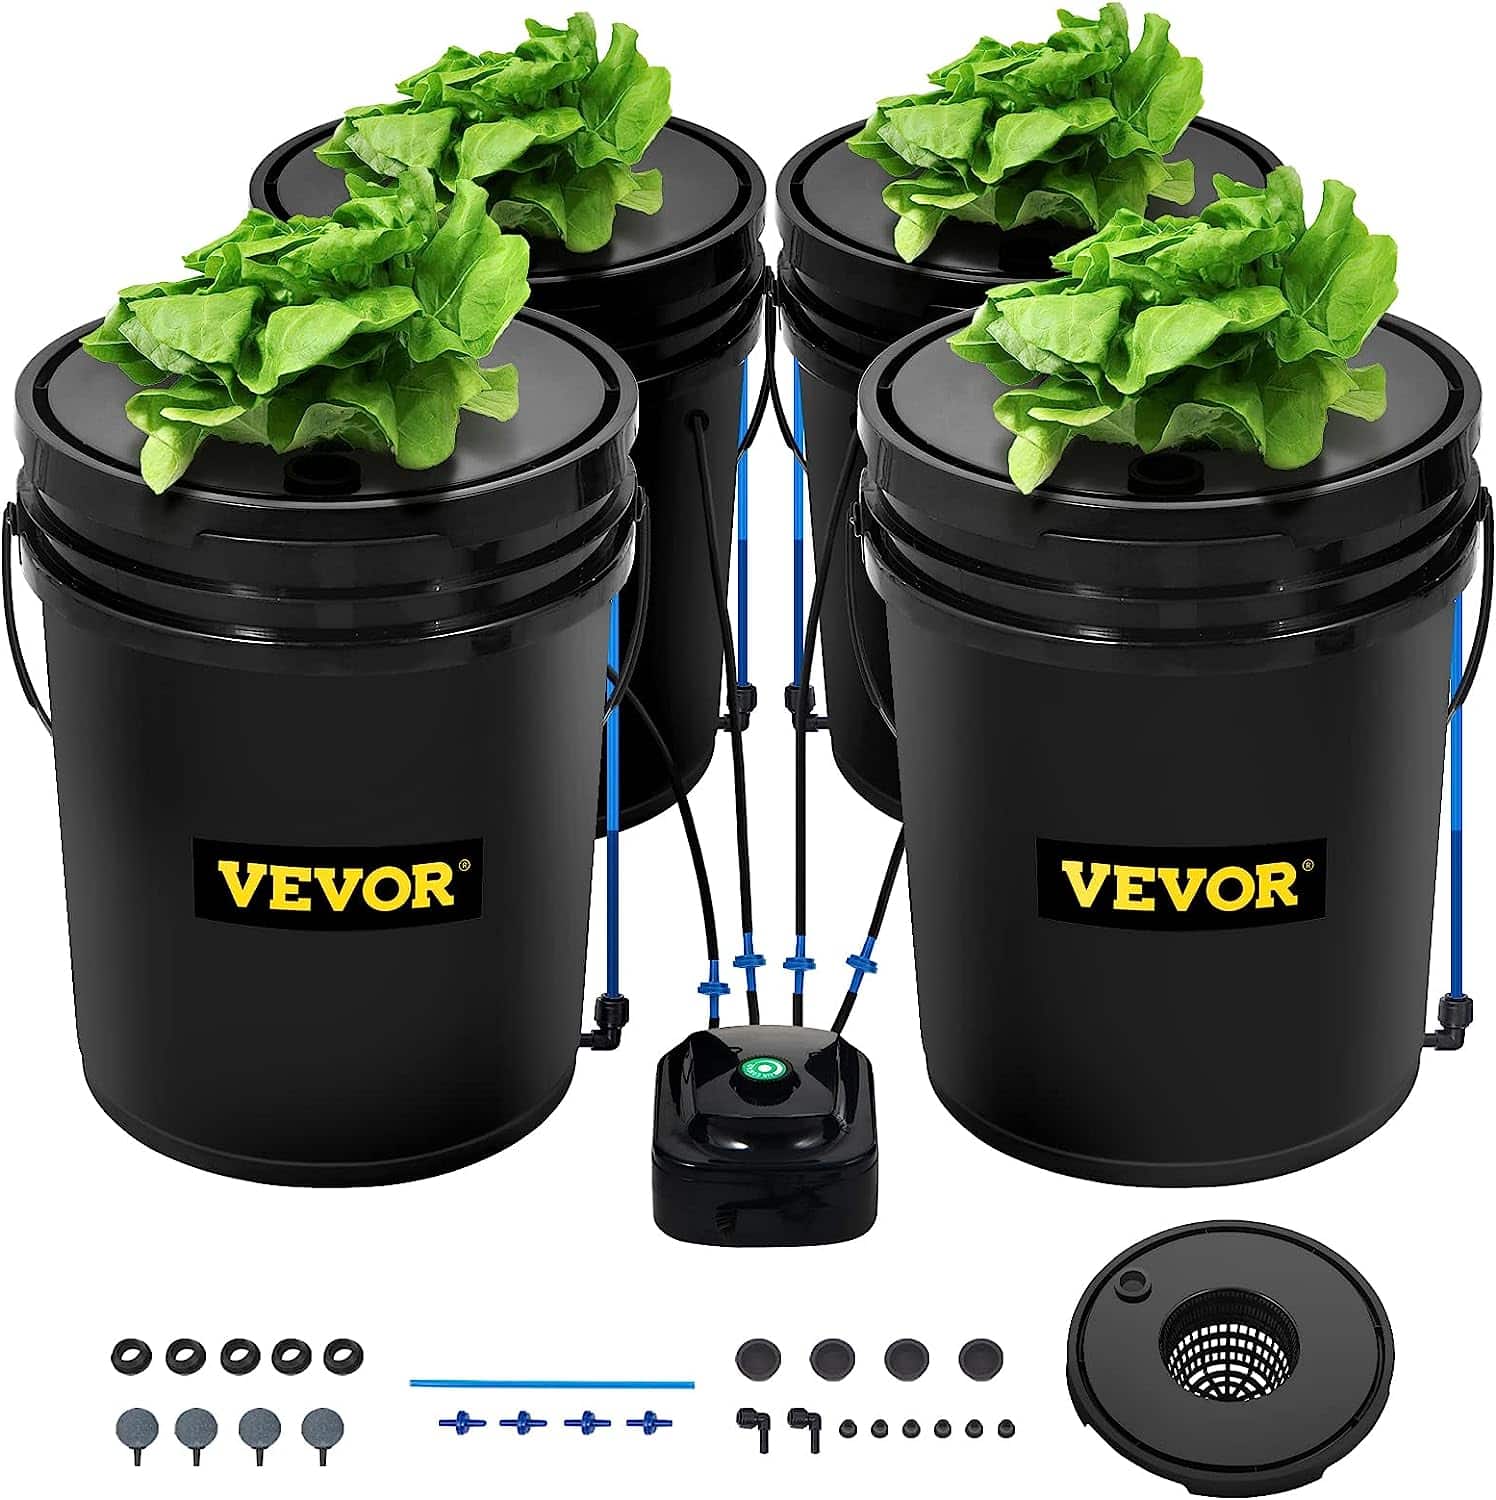 4 Bucket Plastic Containers for Kratky Hydroponic Container Gardening